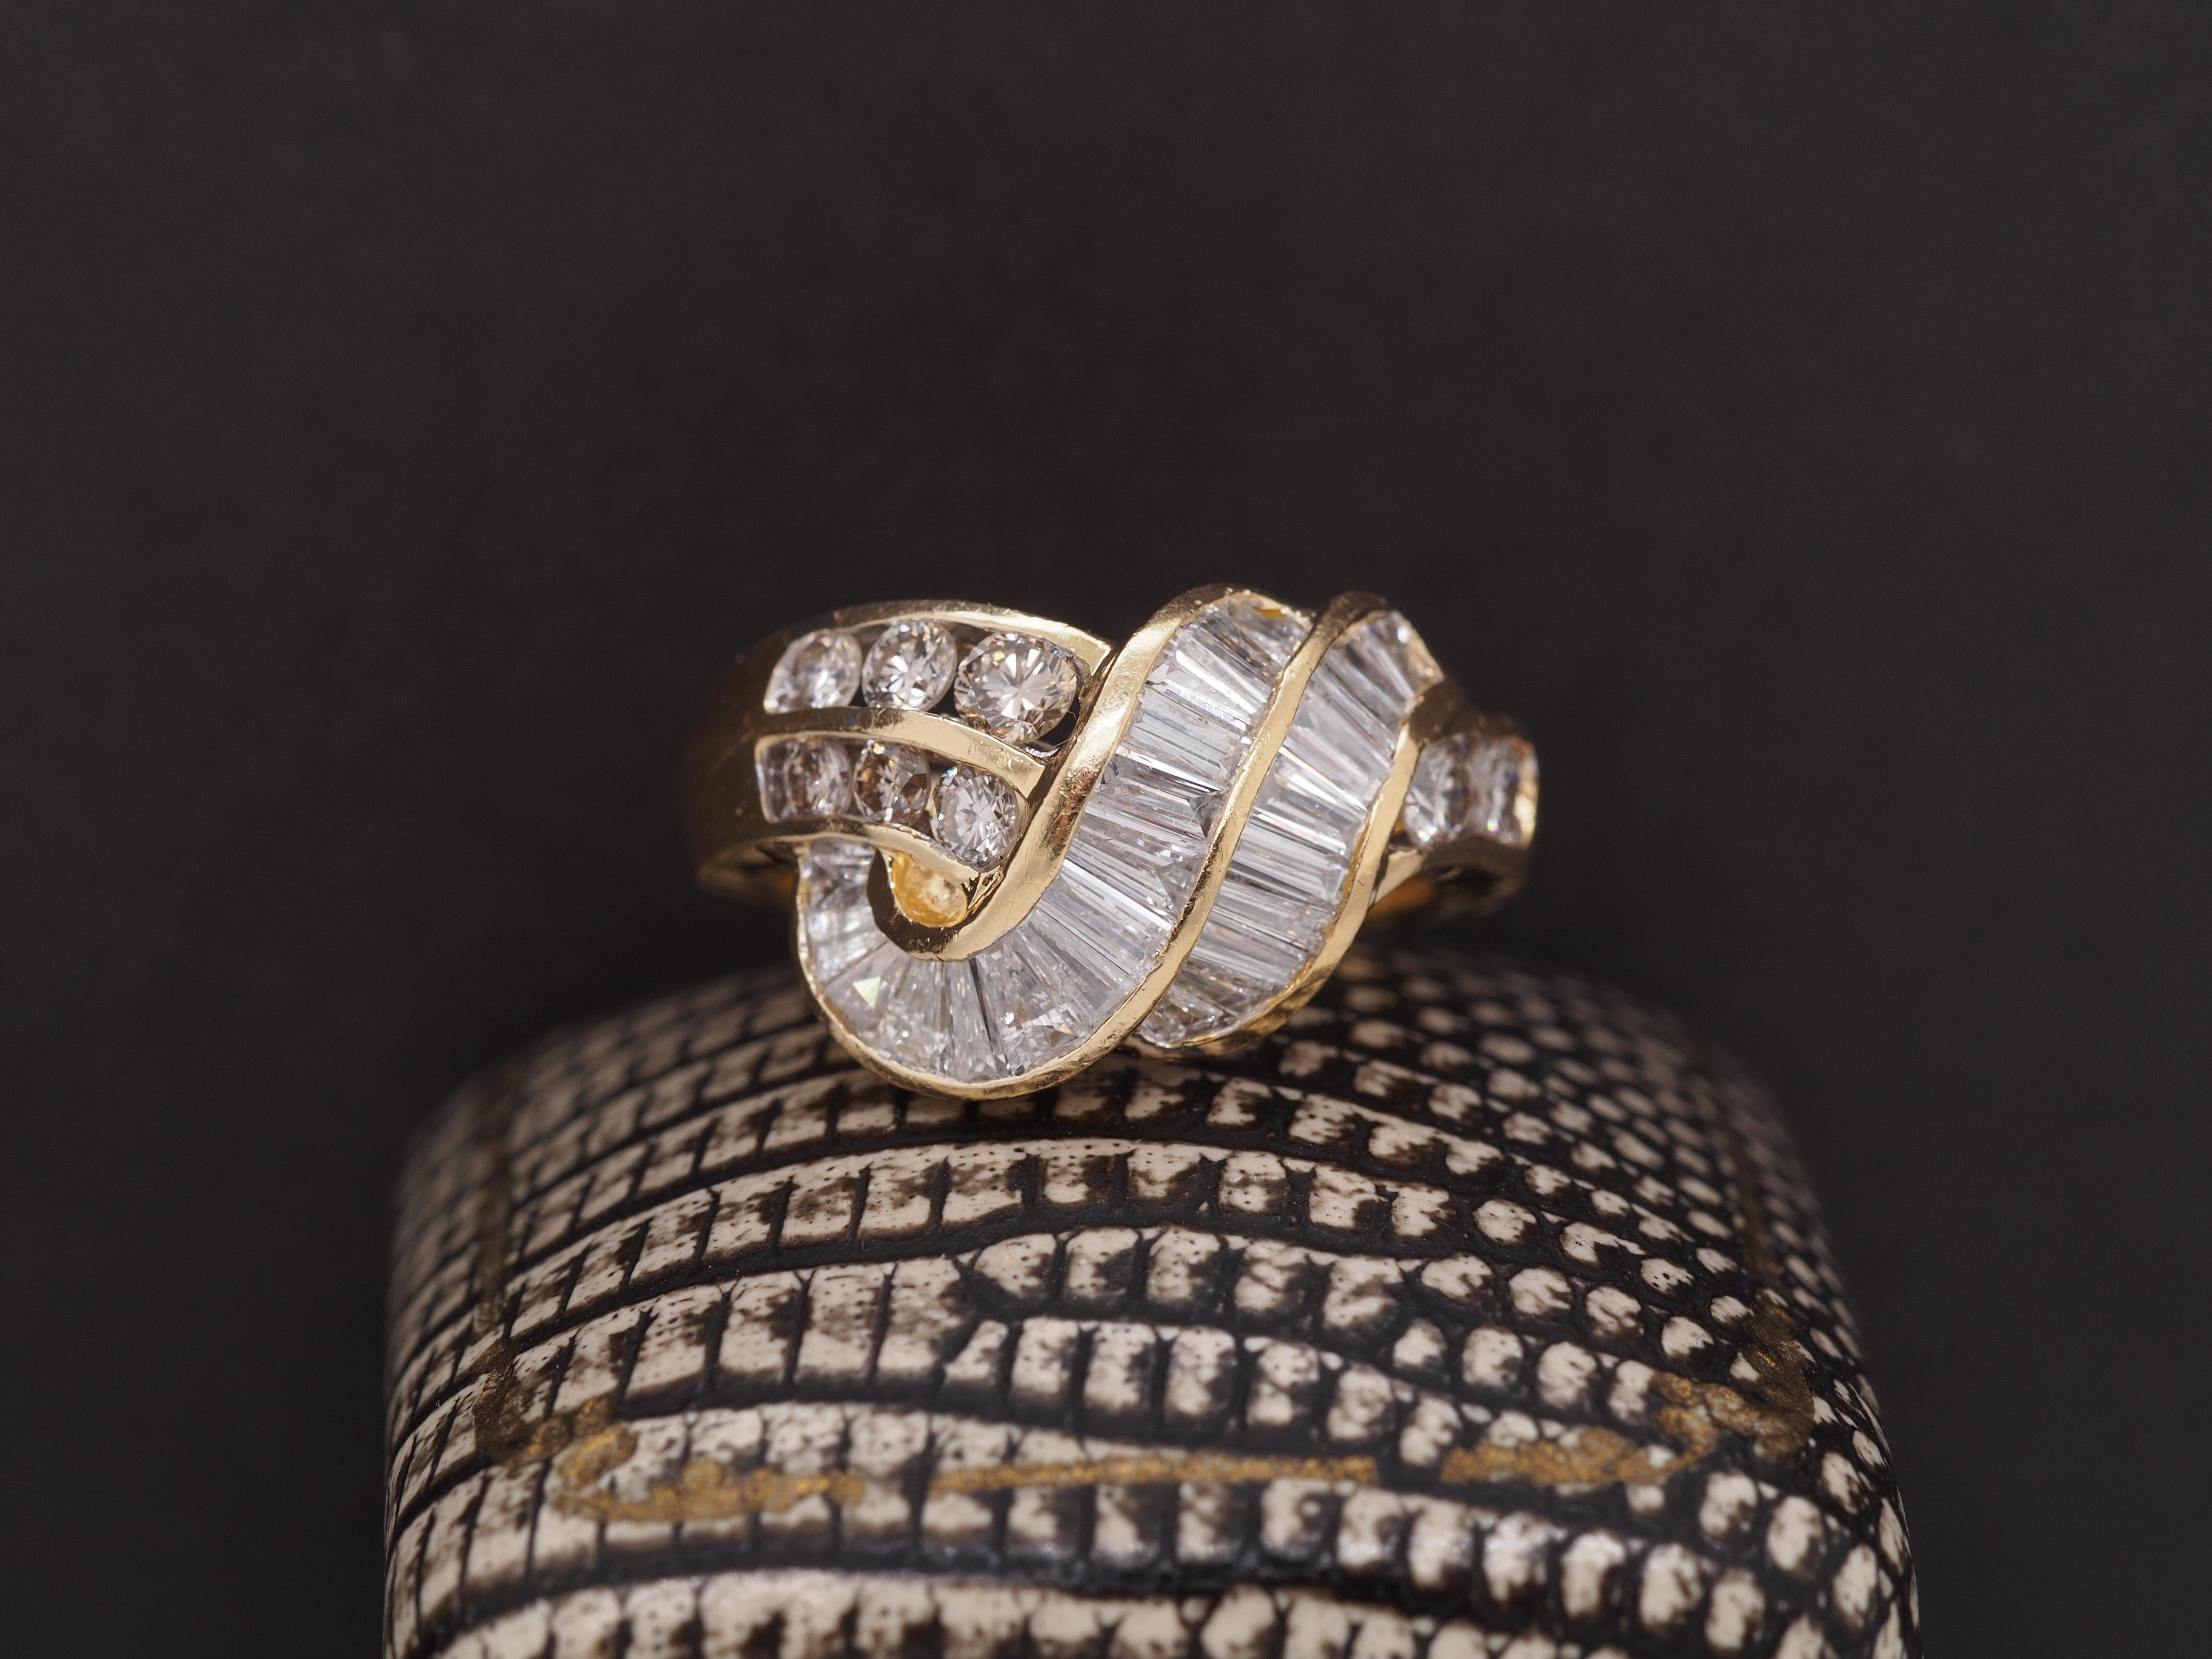 Year: 2000s
Item Details:
Ring Size: 5
Metal Type: 18K Yellow Gold [Hallmarked, and Tested]
Weight: 8.4 grams
Diamond Details: 2.00ct total weight, H/I Color, SI1-I1 Clarity, Round Brilliant and Baguette Shape, Natural Diamonds
Band Width: 3